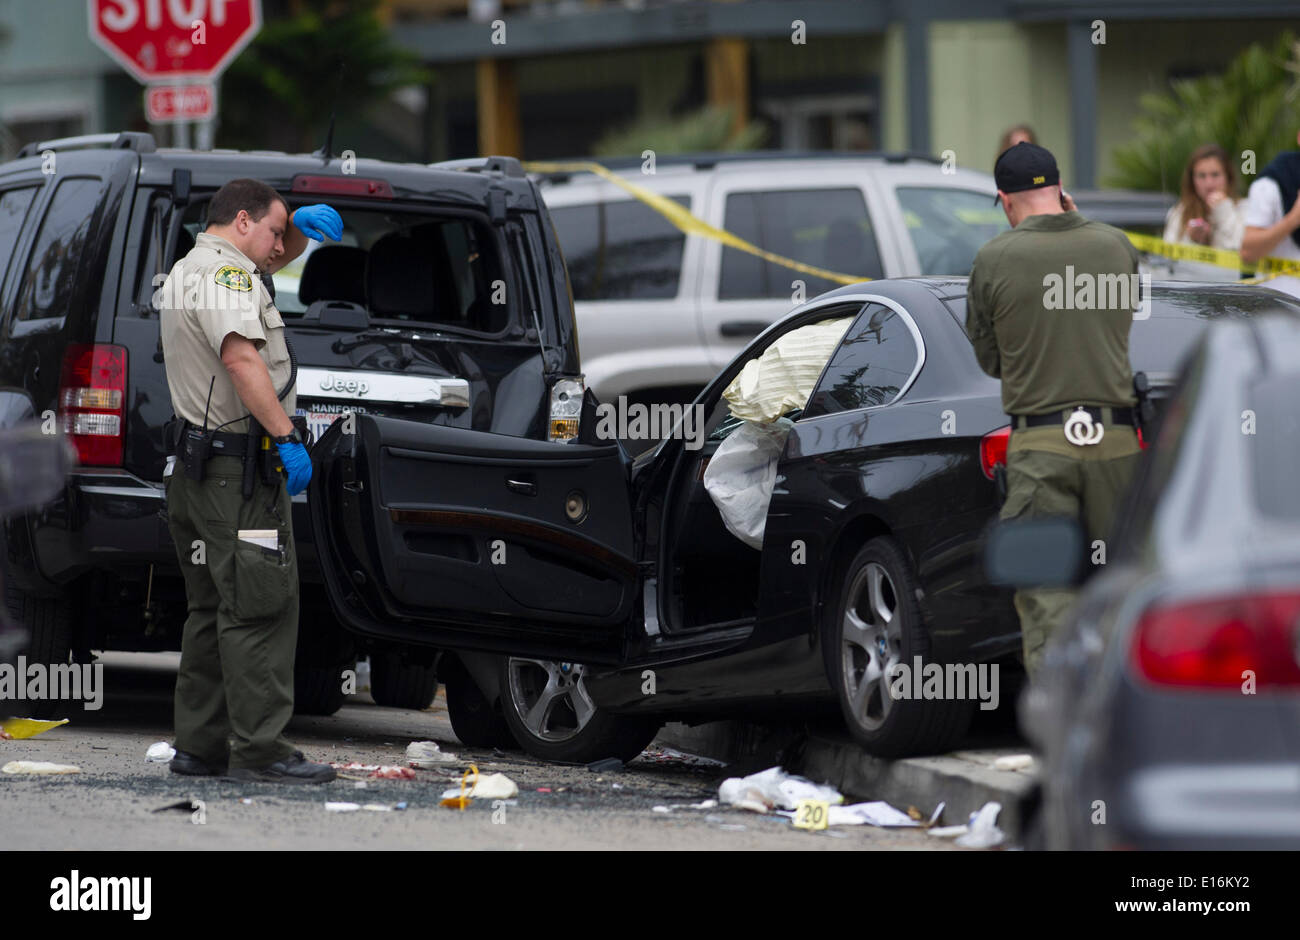 Santa Barbara, Southern California of the USA. 24th May, 2014. Policemen investigate the scene of shooting in Santa Barbara County, Southern California of the United States, May 24, 2014. Drive-by shootings in Southern California on Friday night left seven dead and seven wounded, a rampage that authorities believe to be 'premeditated mass murder', Santa Barbara County Sheriff Bill Brown said during a Saturday morning news conference. Credit:  Yang Lei/Xinhua/Alamy Live News Stock Photo